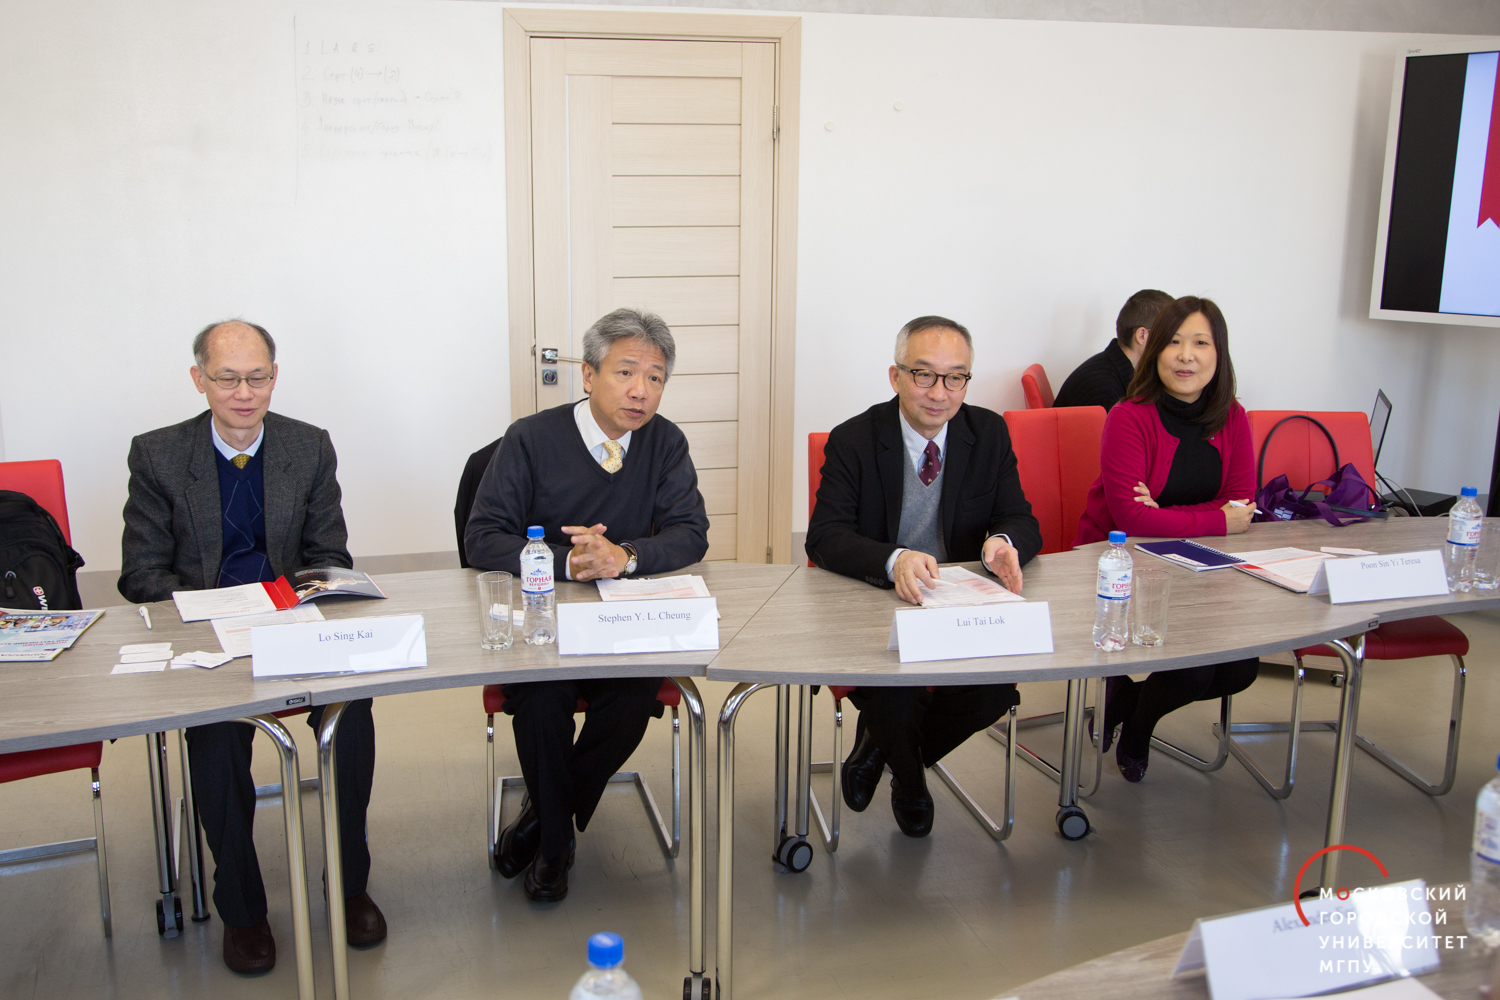 MCU hosts a delegation from Education University of Hong Kong and Minin University